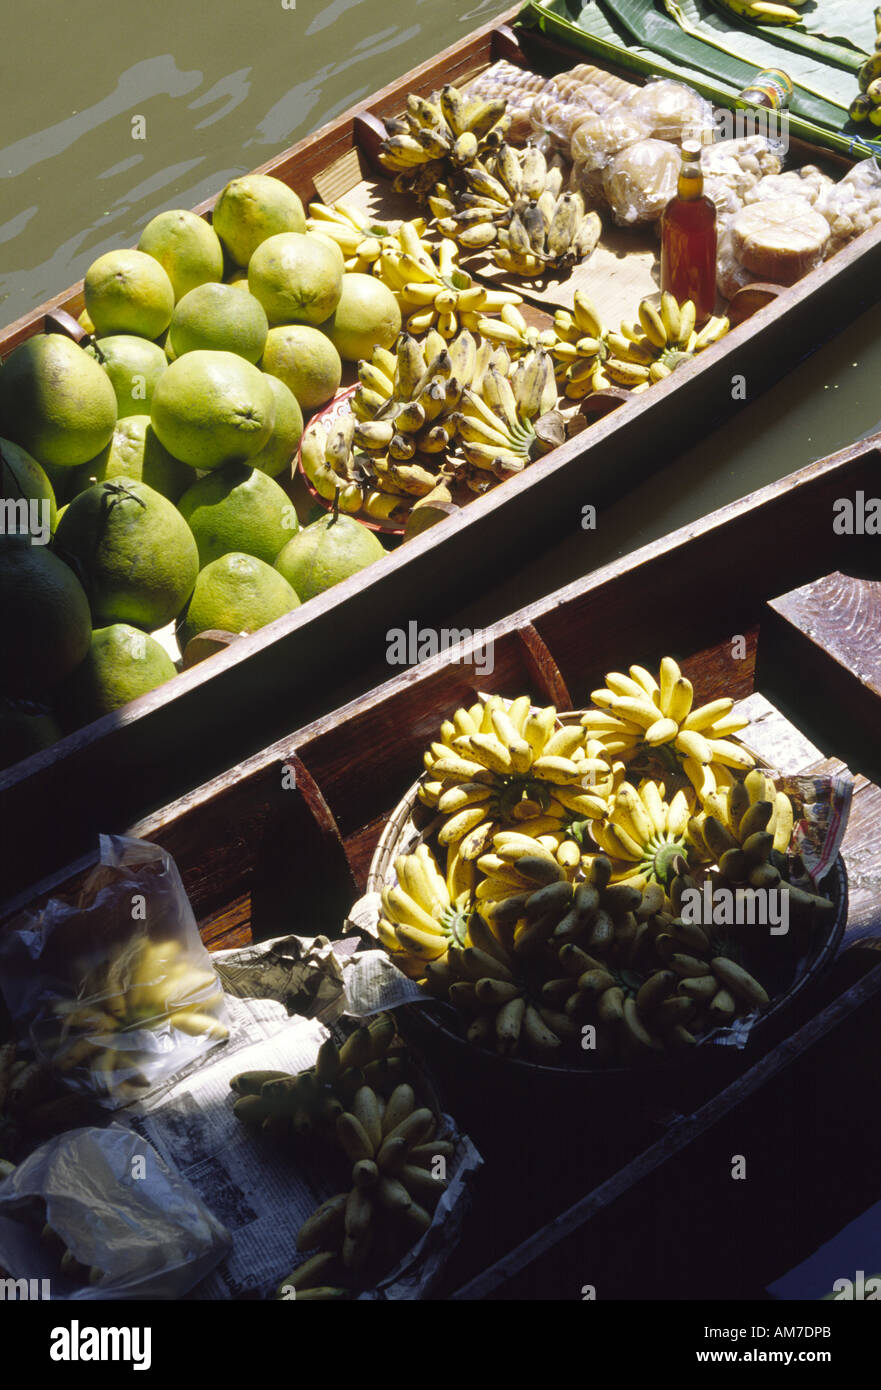 Floating market at Damneurnsaduak Thailand image of fruits displayed on 2 adjoining boats showing pomelos bananas and other loca Stock Photo